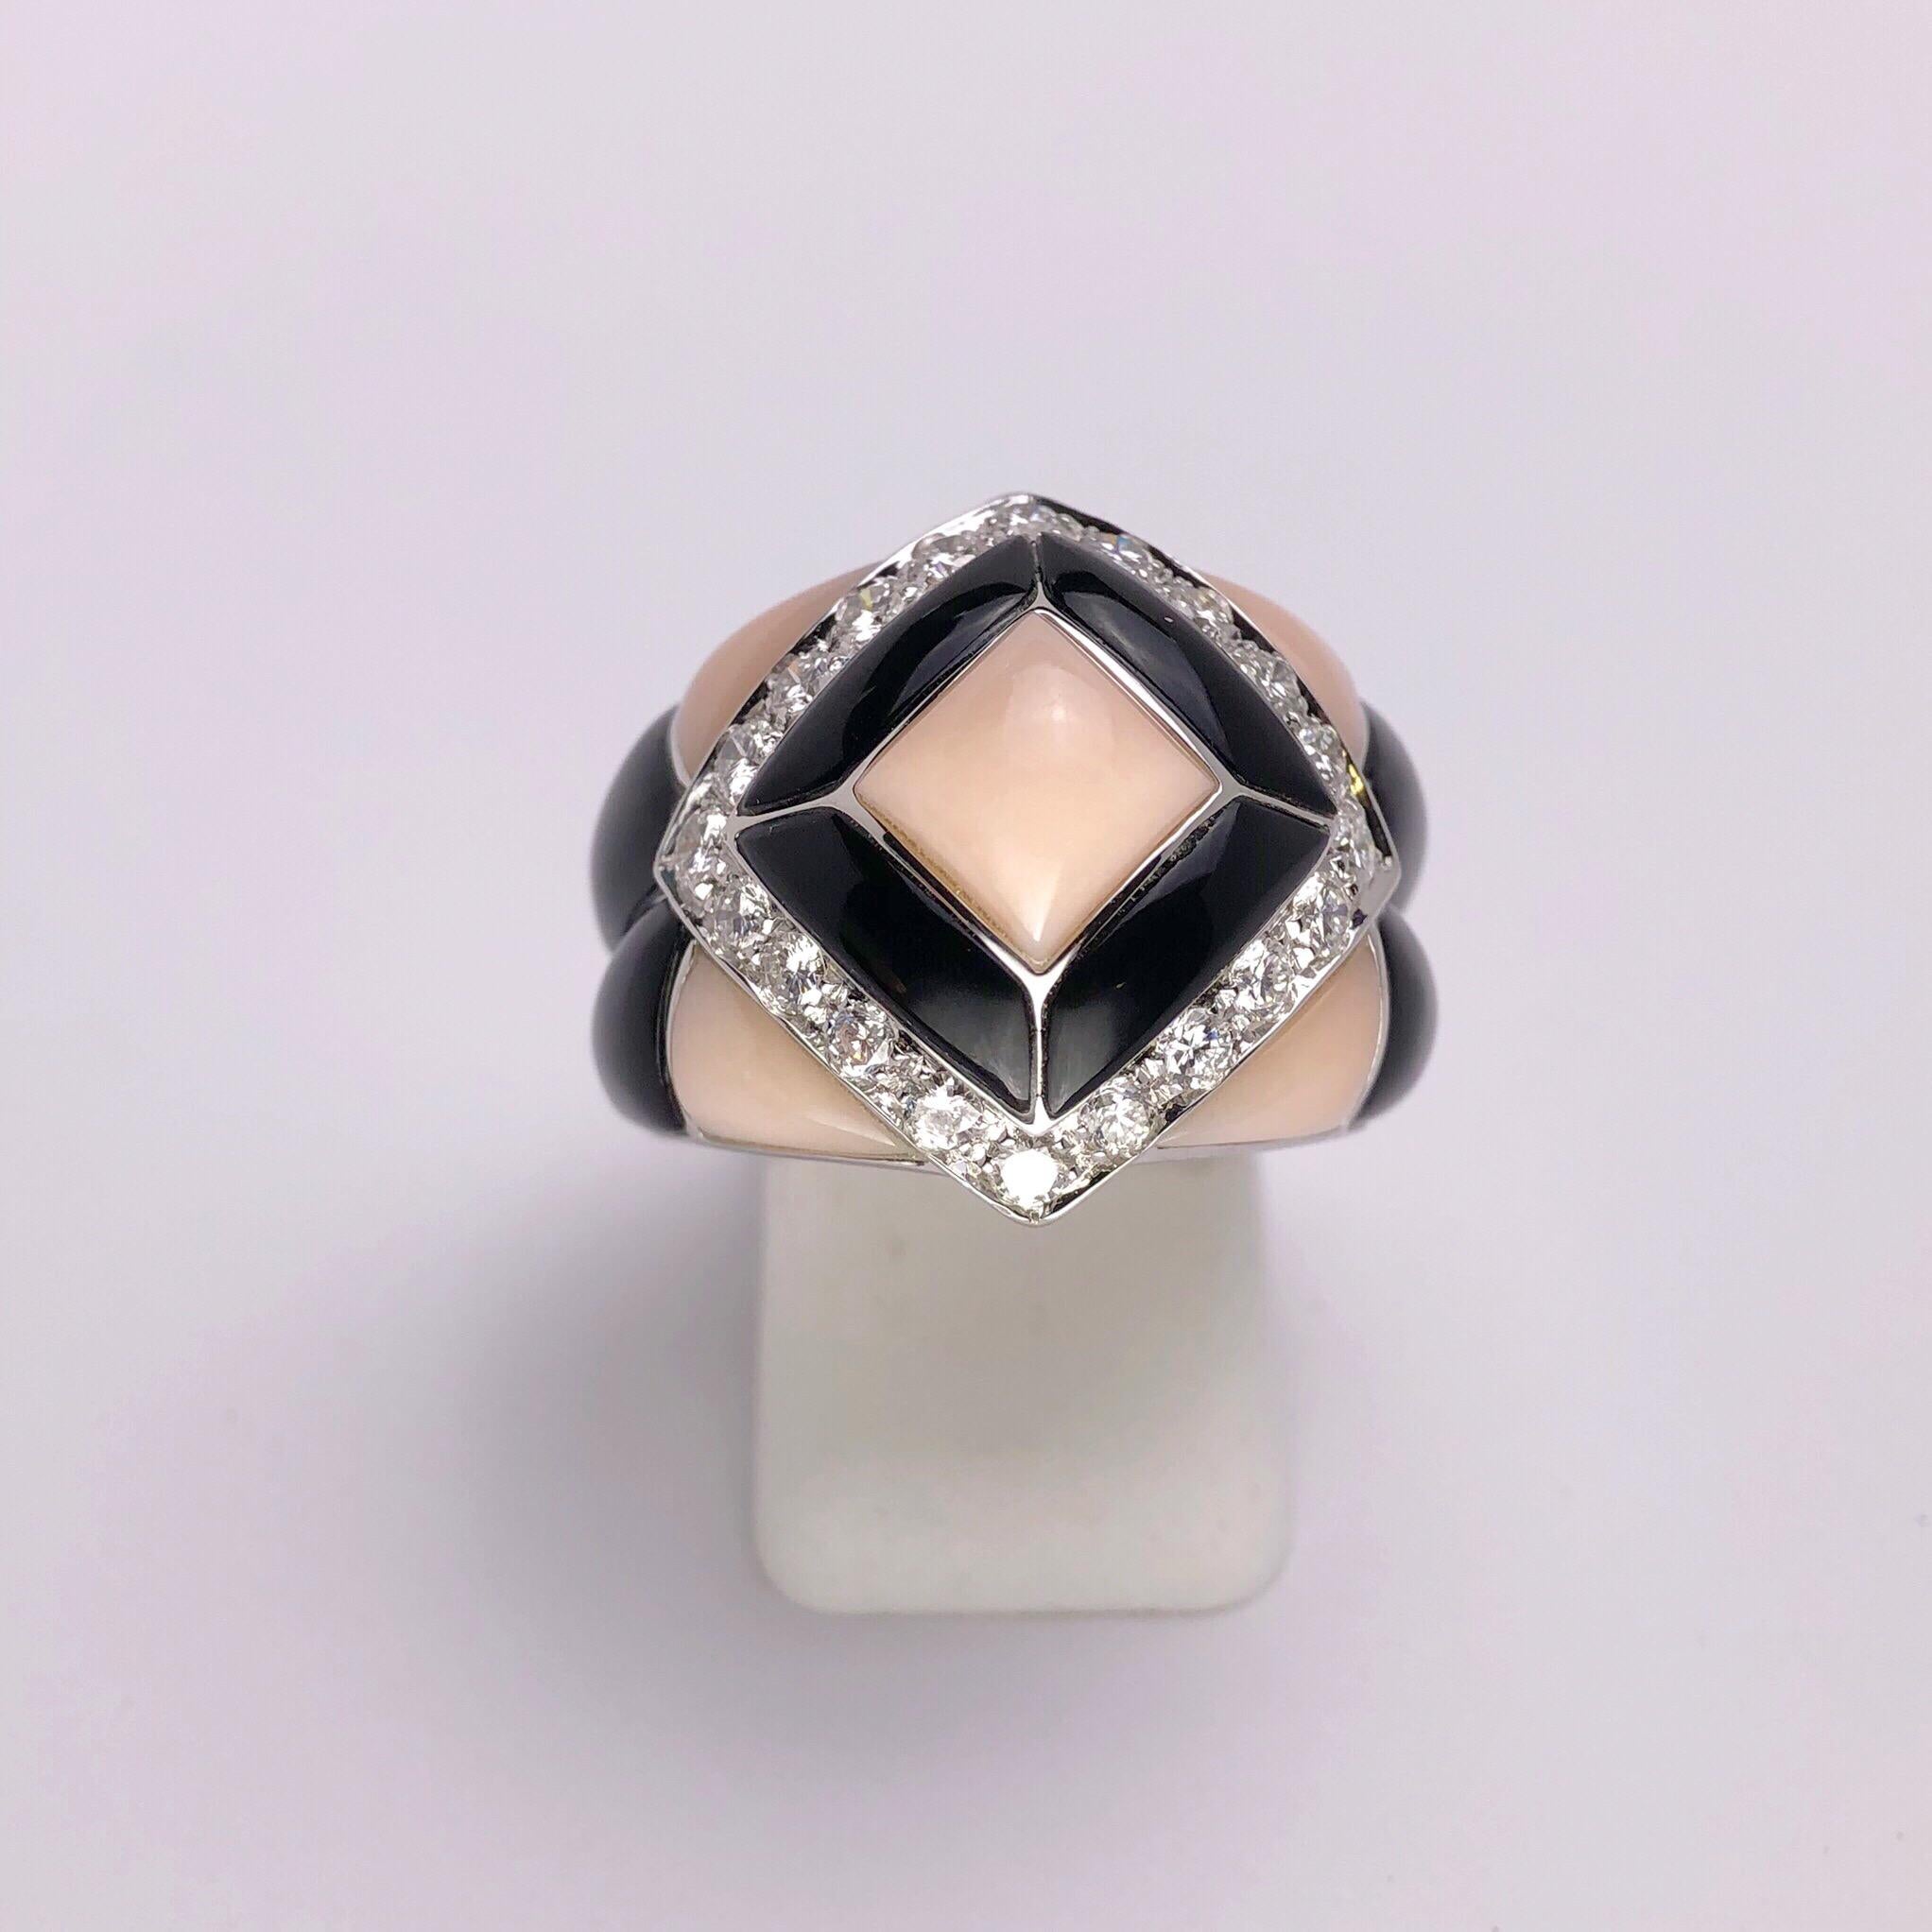 This stunning 18KT white gold ring was designed by renowned Italian Jewelers Oro Trend . It has a strong Art Deco influence. Hand carved geometric sections of baby pink coral and black onyx  grace this magnificent ring.The center section is tiered